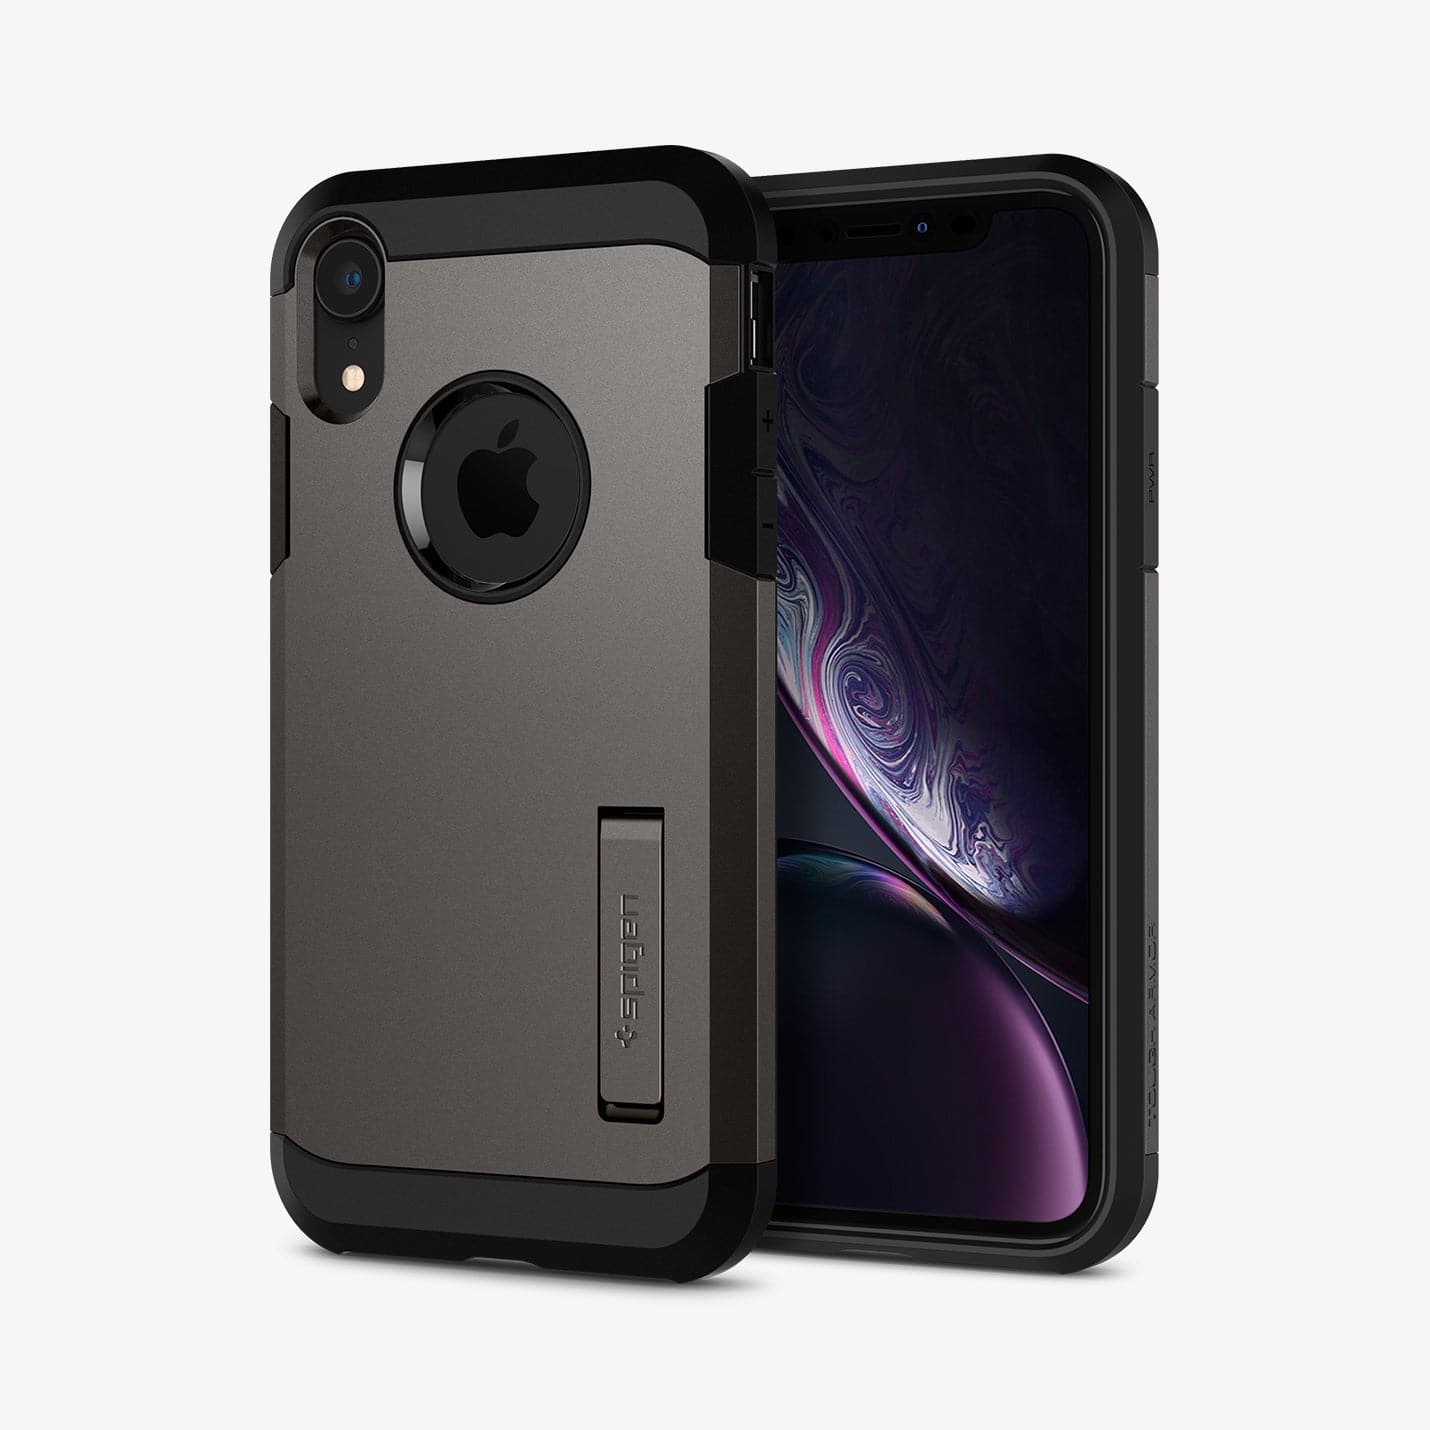 064CS24877 - iPhone XR Case Tough Armor in gunmetal showing the back and front